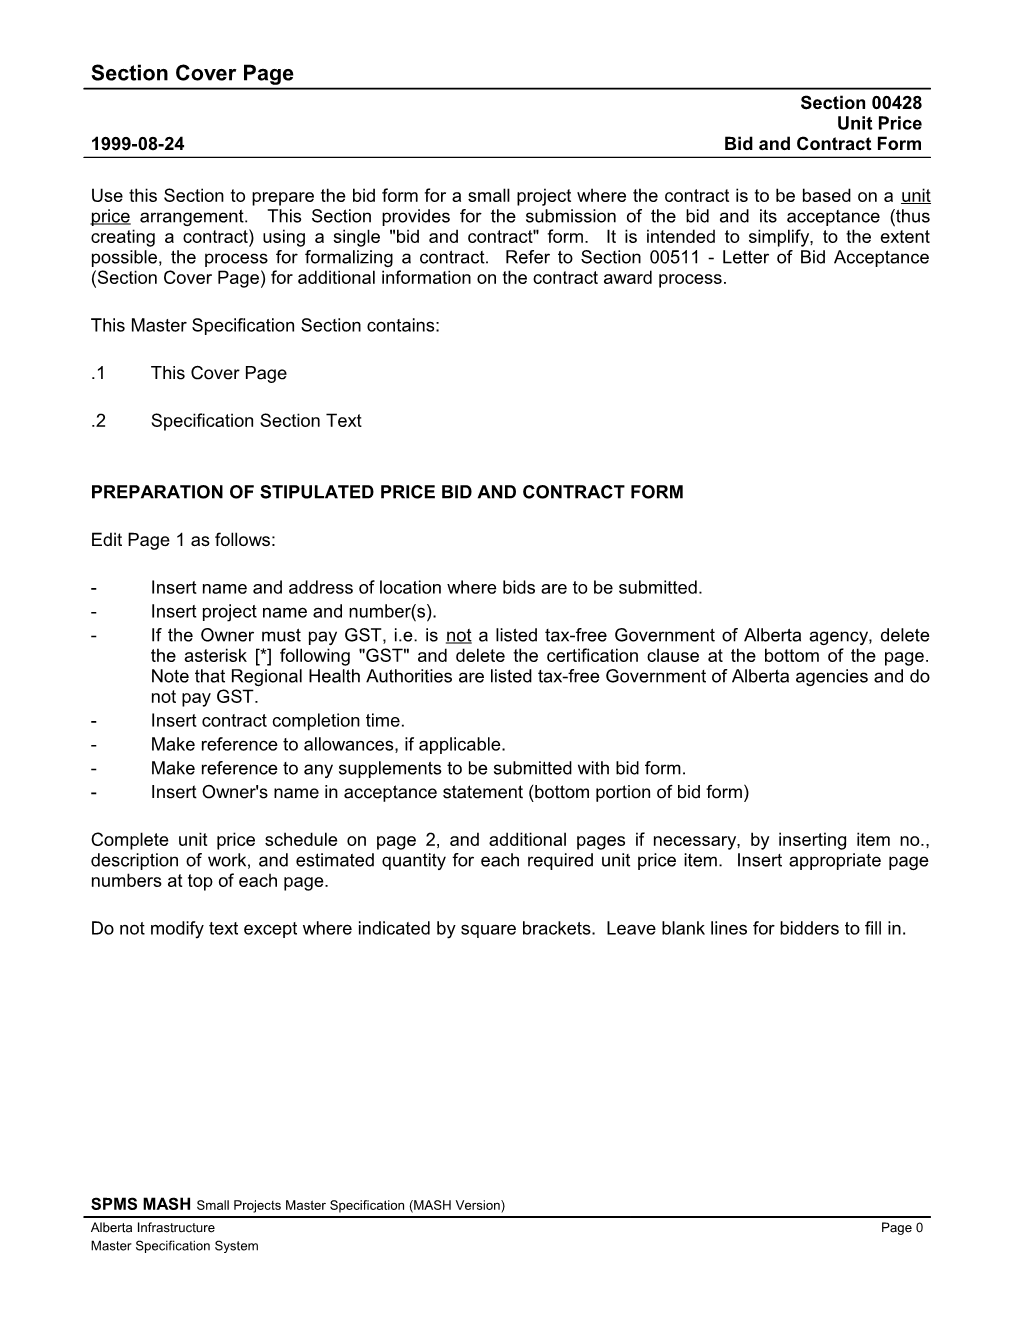 00428 - Unit Price Bid and Contract Form